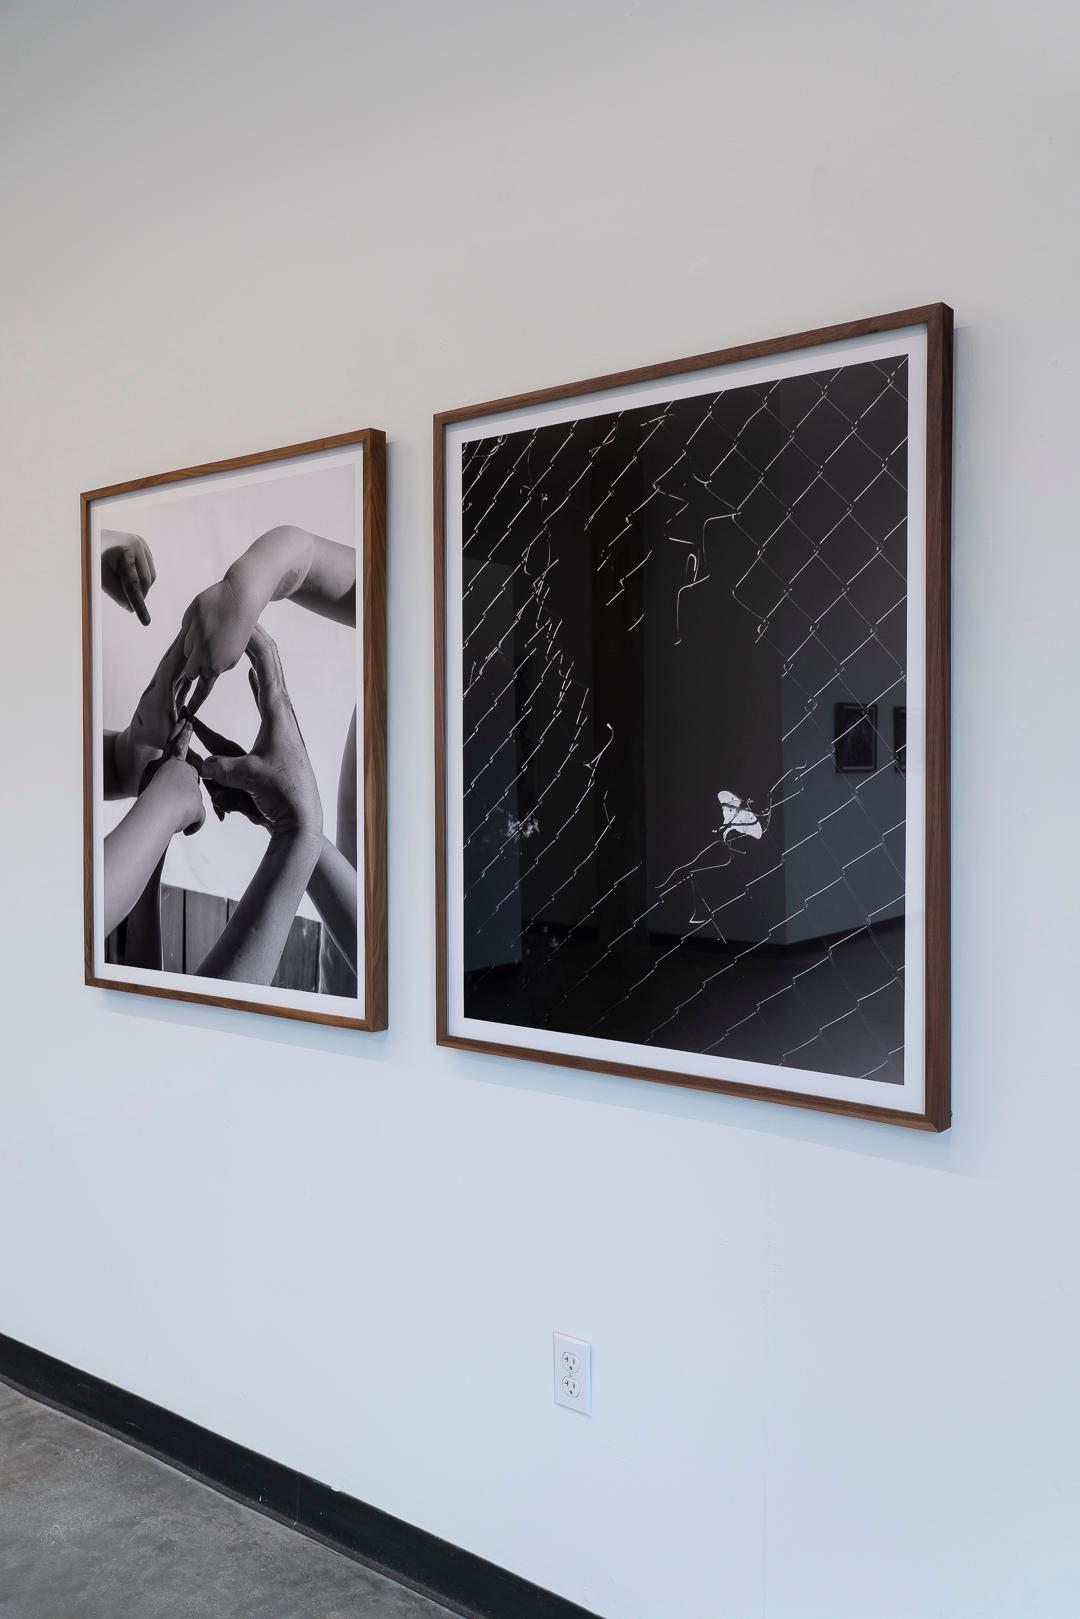 Moth is featured in The Four Pillars, Eli Durst's second solo exhibition at Ivester Contemporary. The show consists of photographs derived from his latest photo book, which is also titled The Four Pillars.

Durst’s book, The Four Pillars, explores a